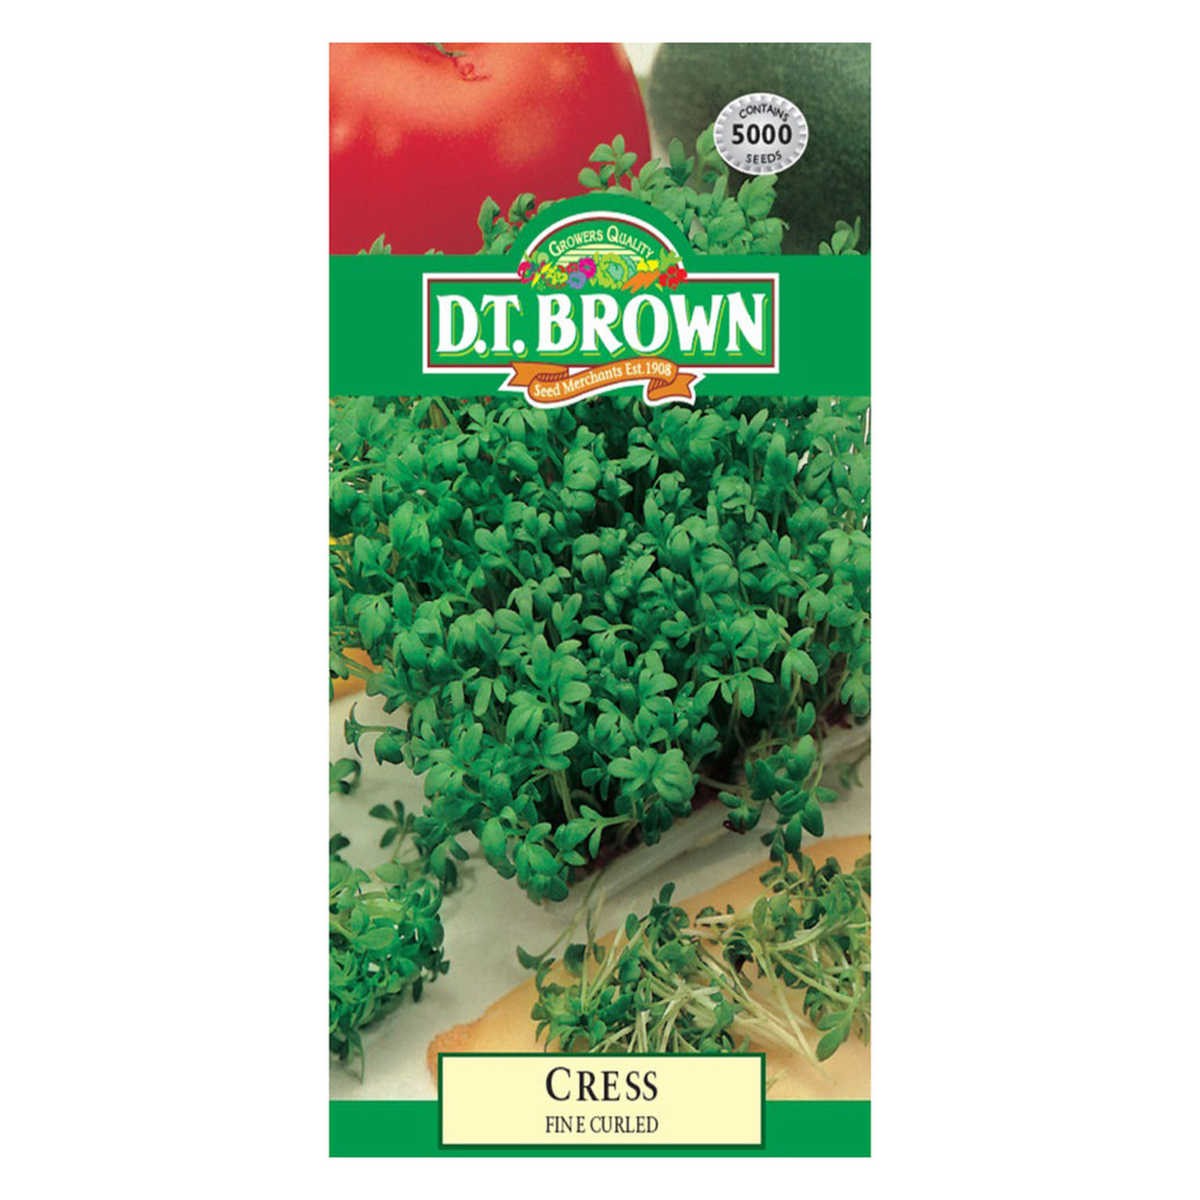 Buy DT Brown Cress Fine Curled Seeds | Dollars and Sense